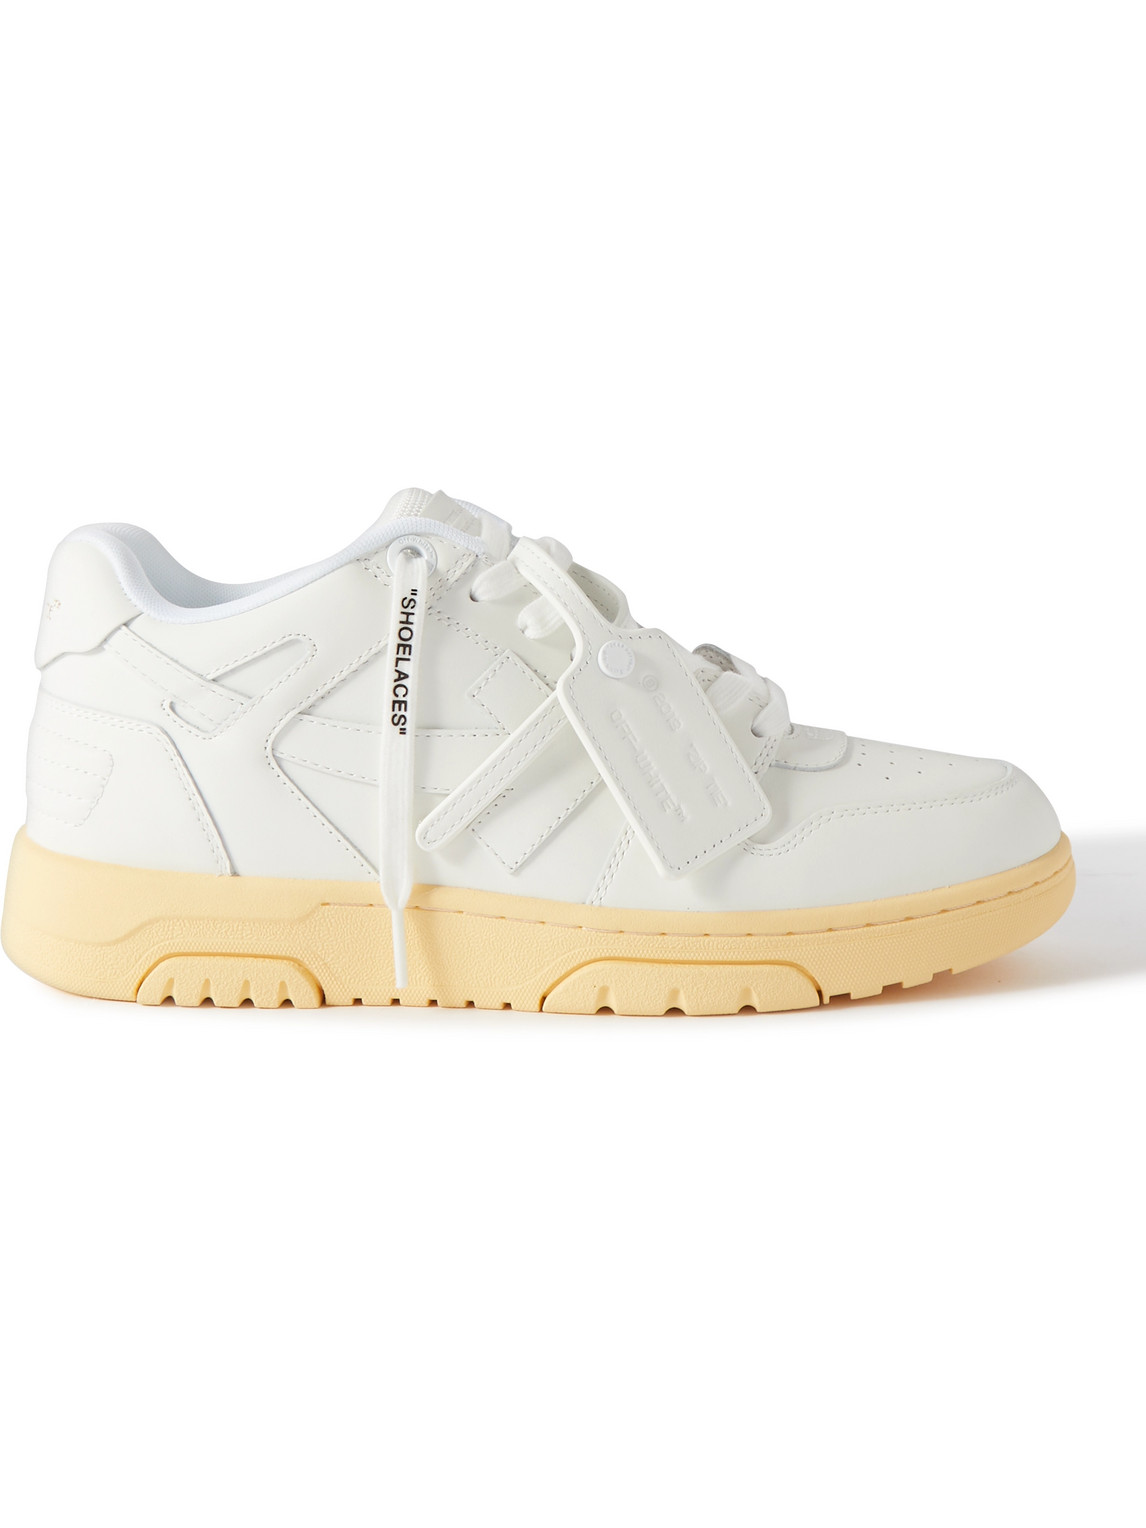 Off-White - Out of Office Leather Sneakers - Men - White - EU 43 von Off-White